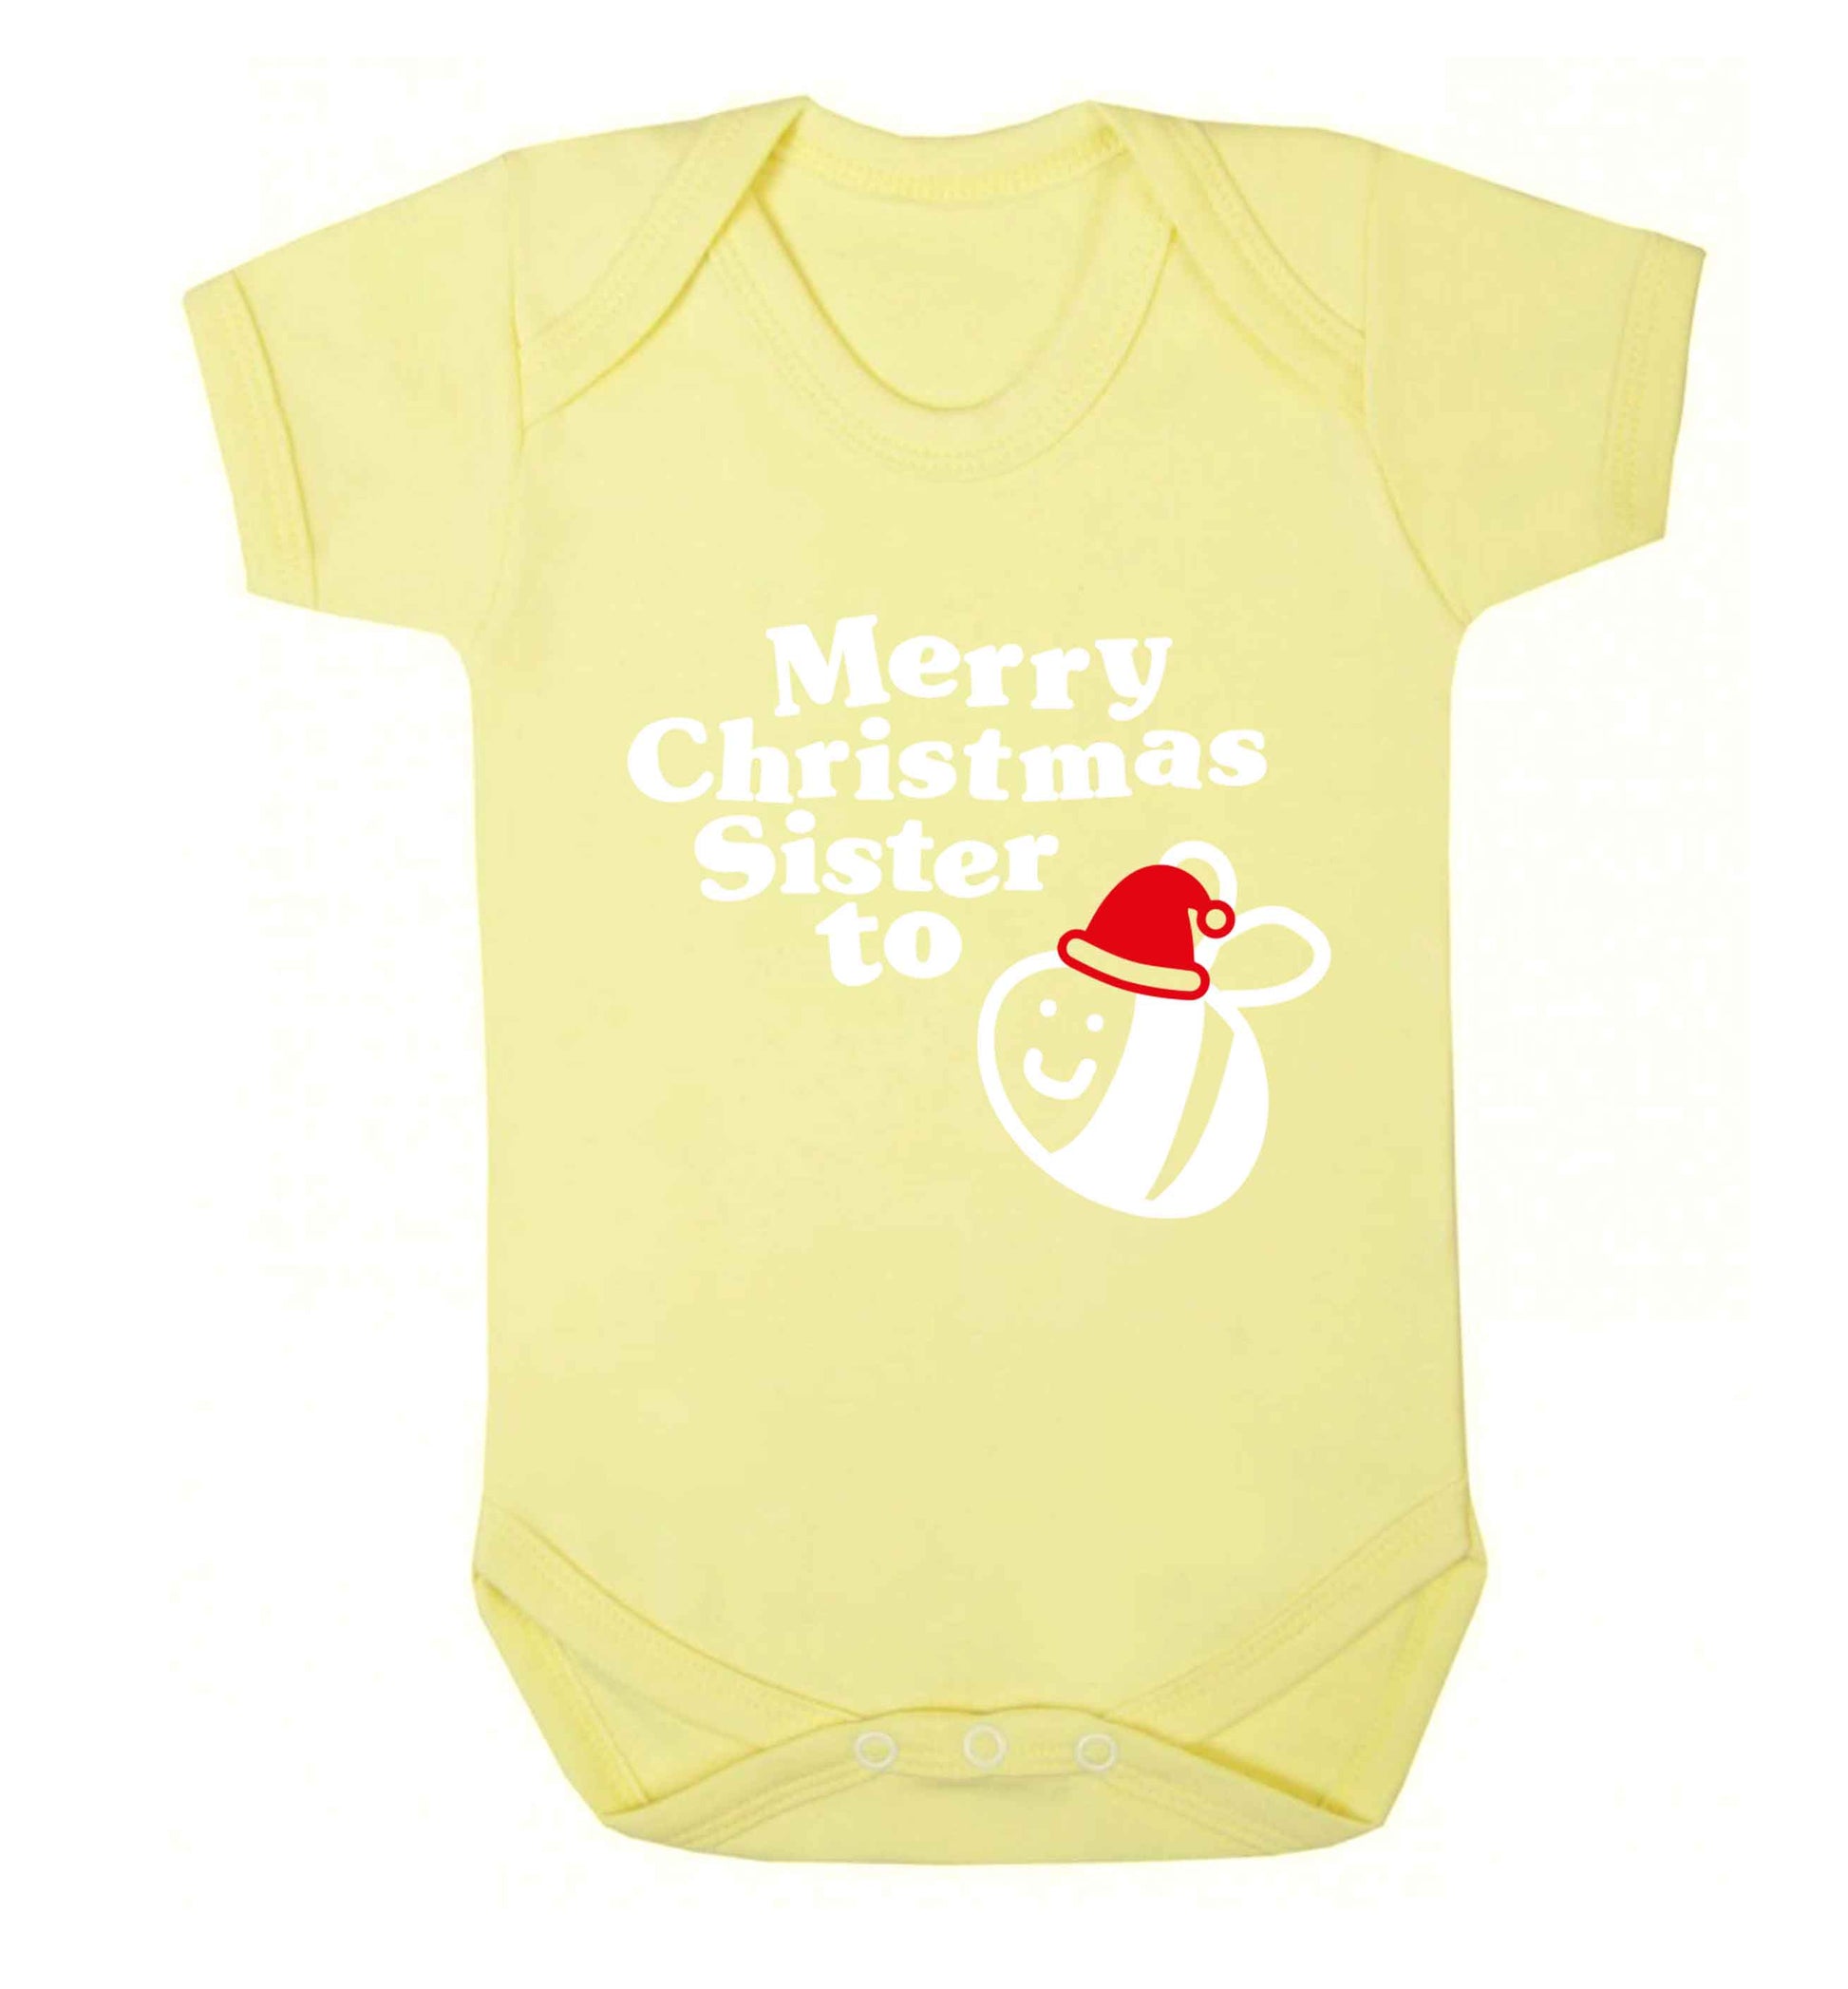 Merry Christmas sister to be Baby Vest pale yellow 18-24 months